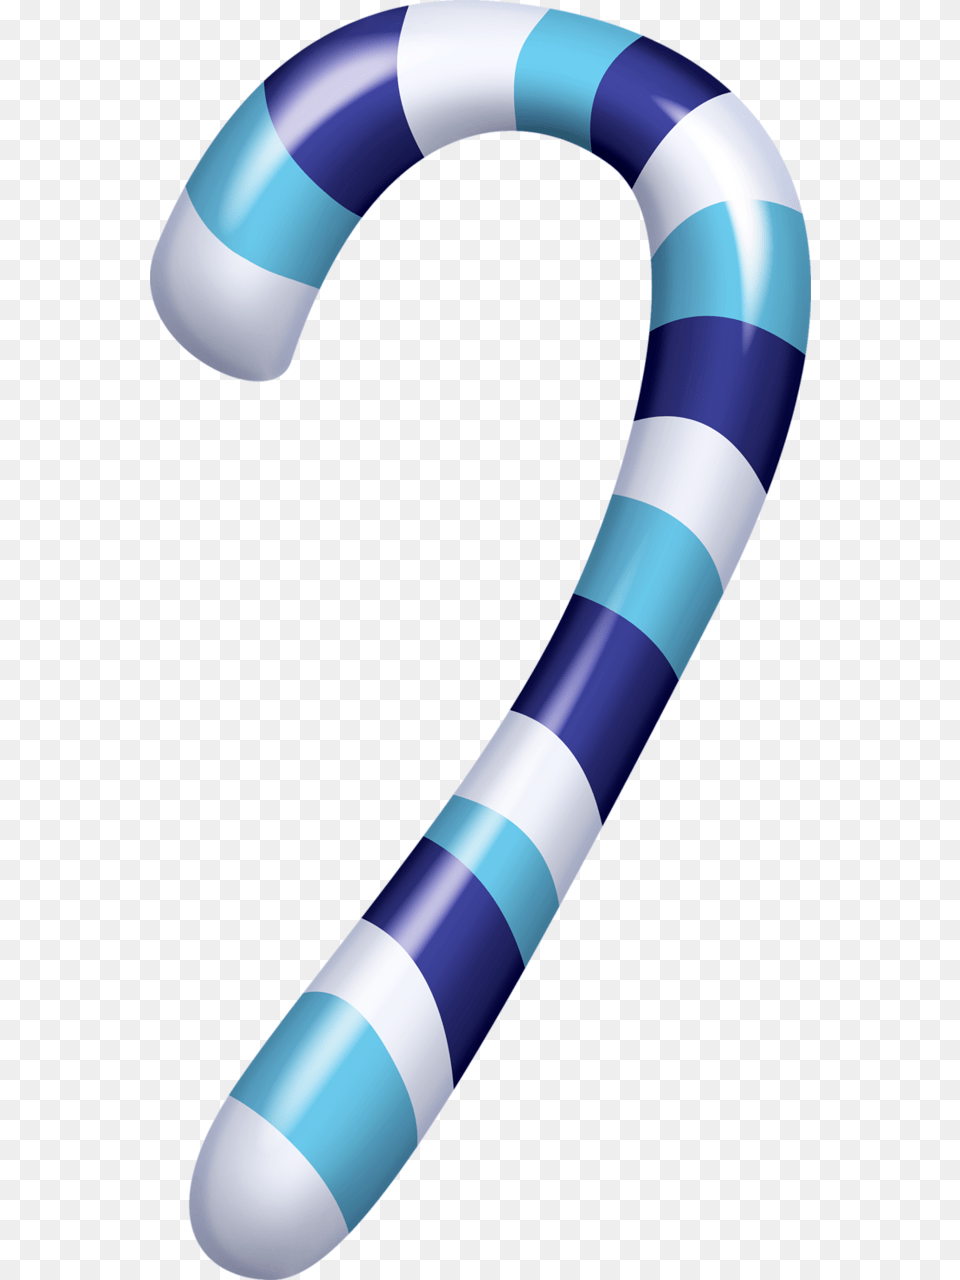 Candy Cane Barley Sugar Inflatable, Rocket, Weapon Png